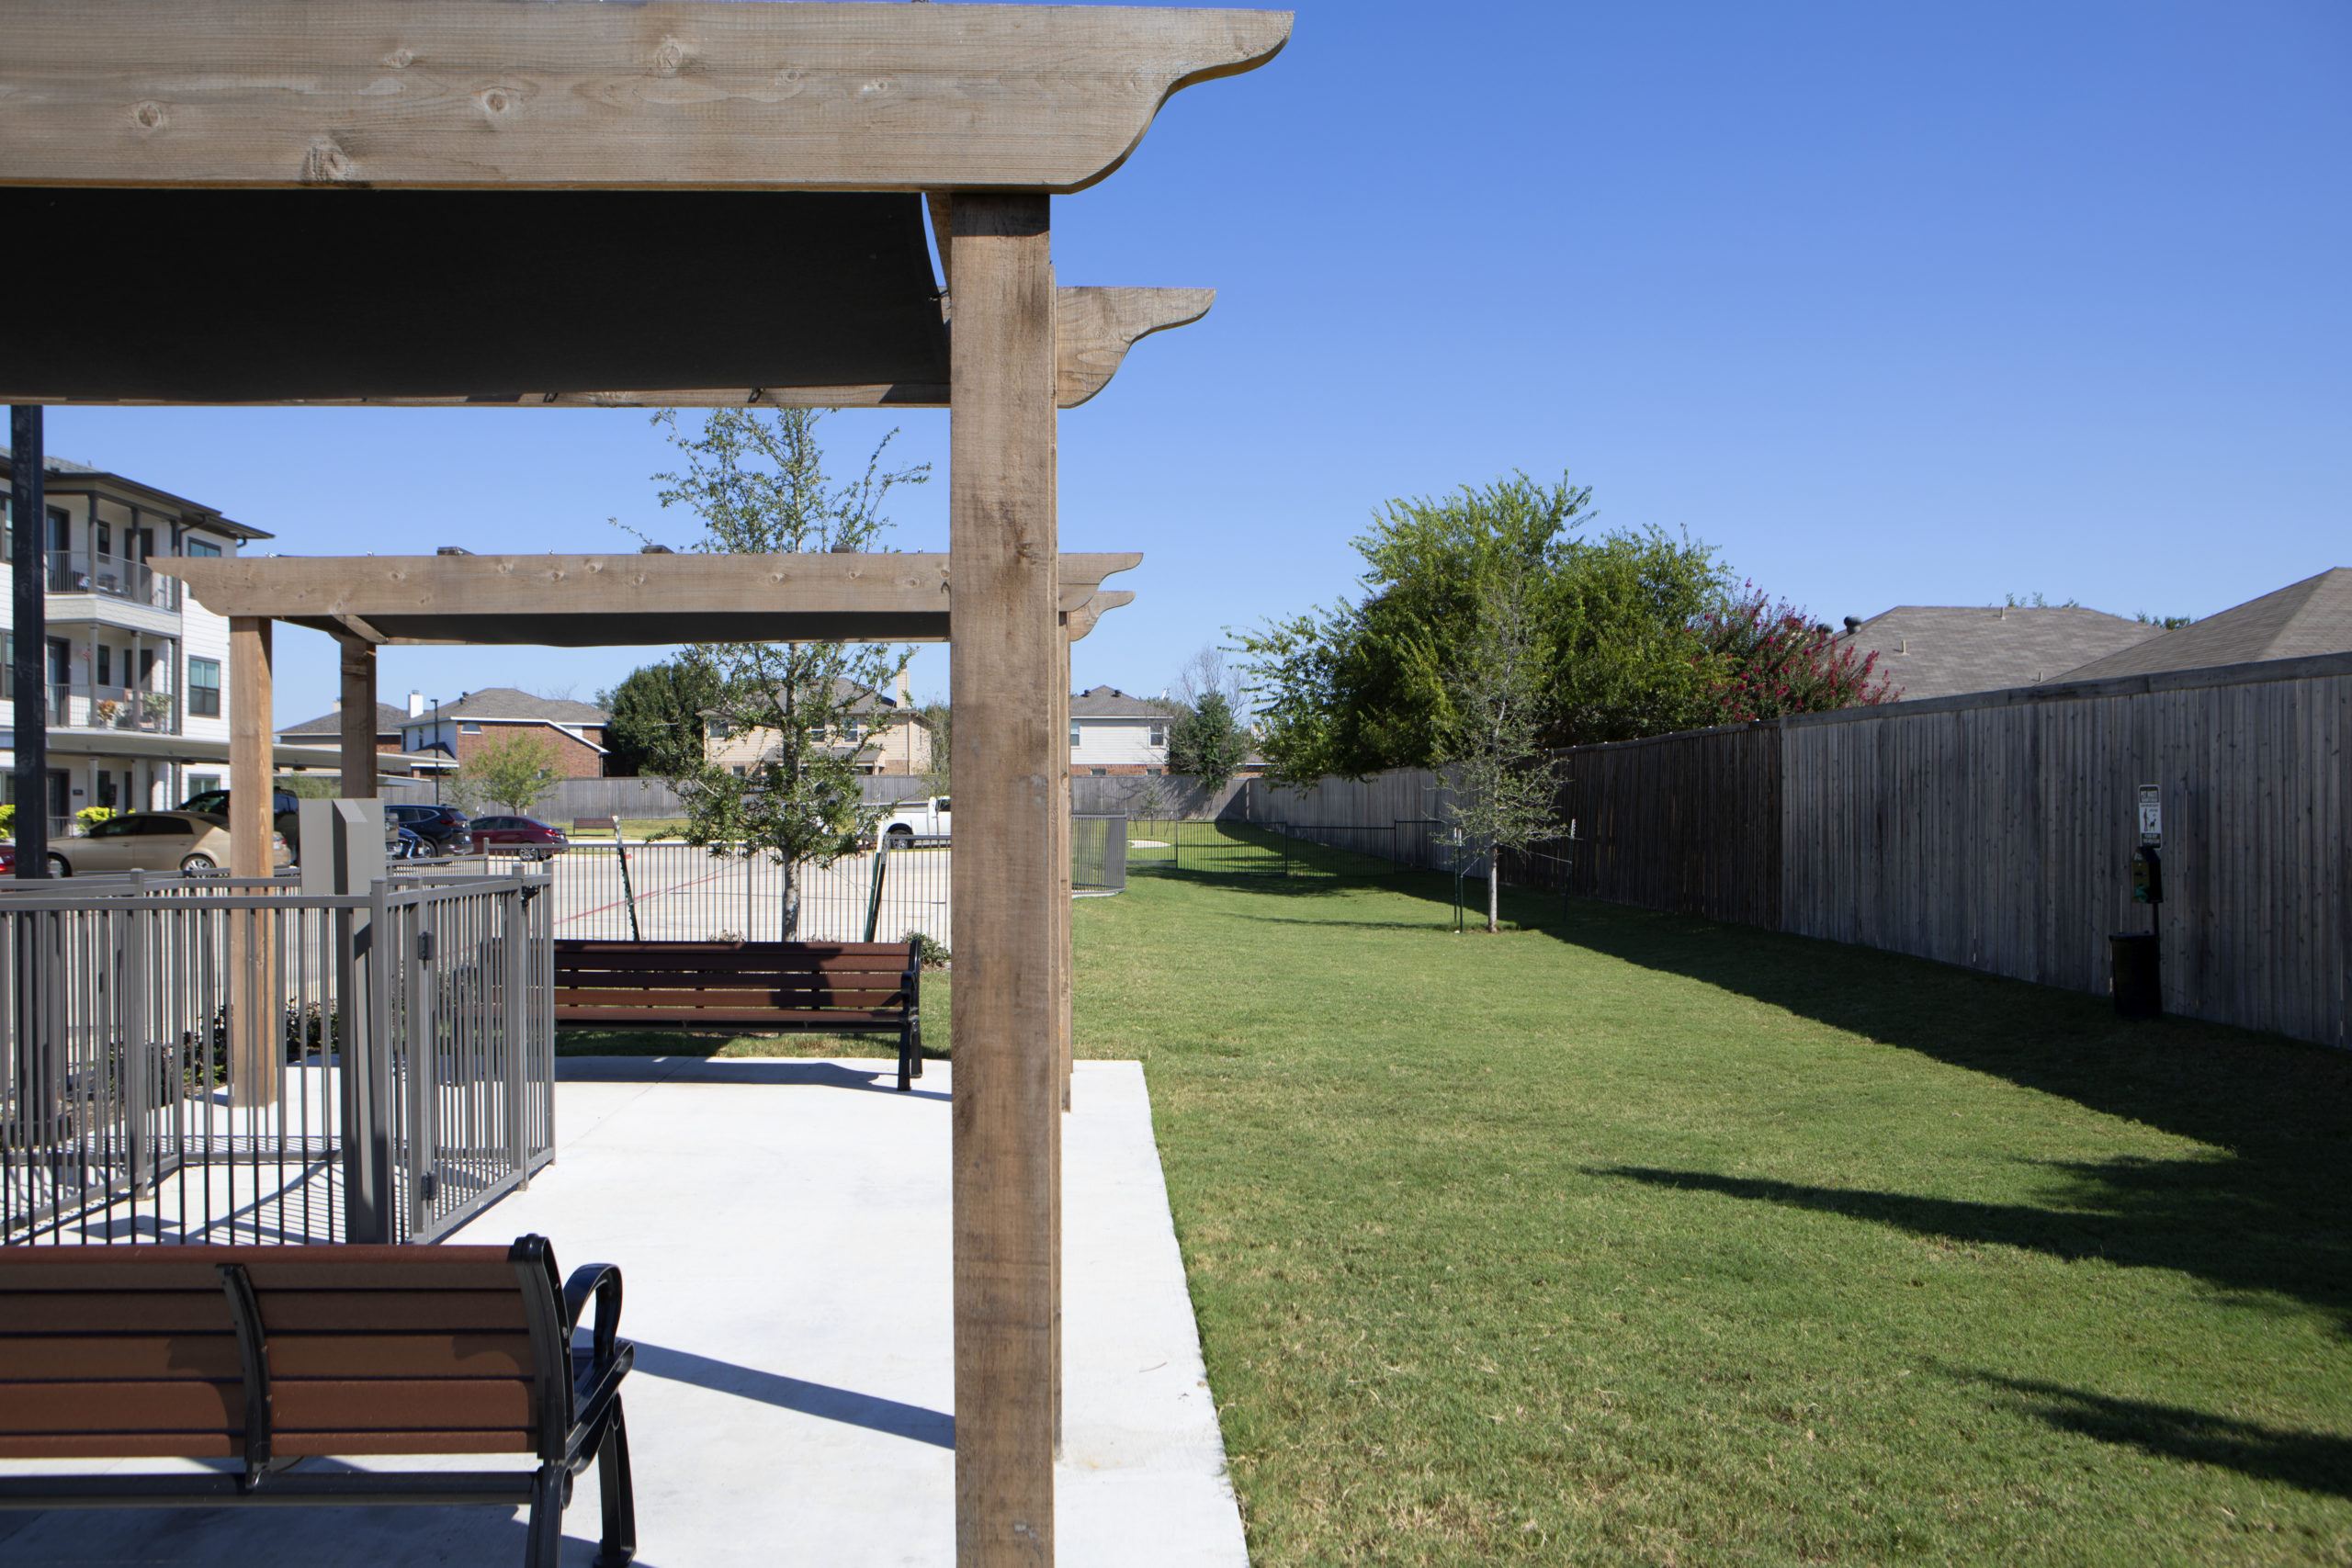 Fenced in dog park at Solea Keller Apartments in Fort Worth Texas